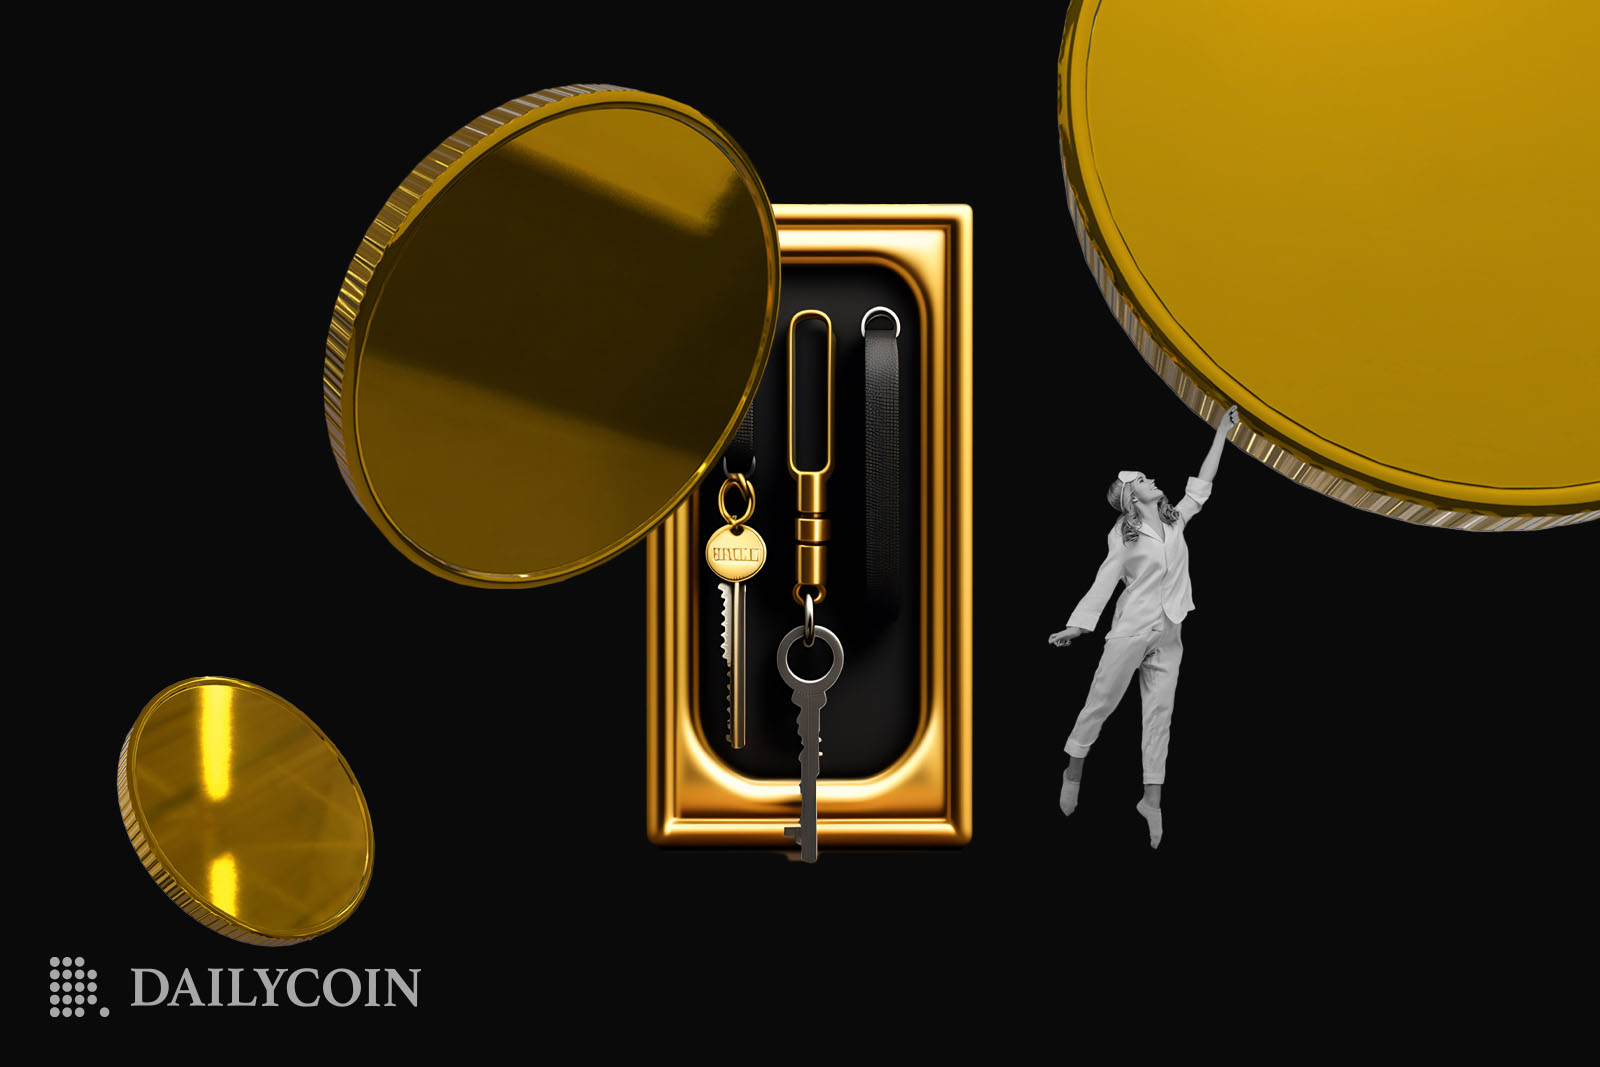 crypto token unlock scheduled coins keys in black background woman floats in the air holding golden coin